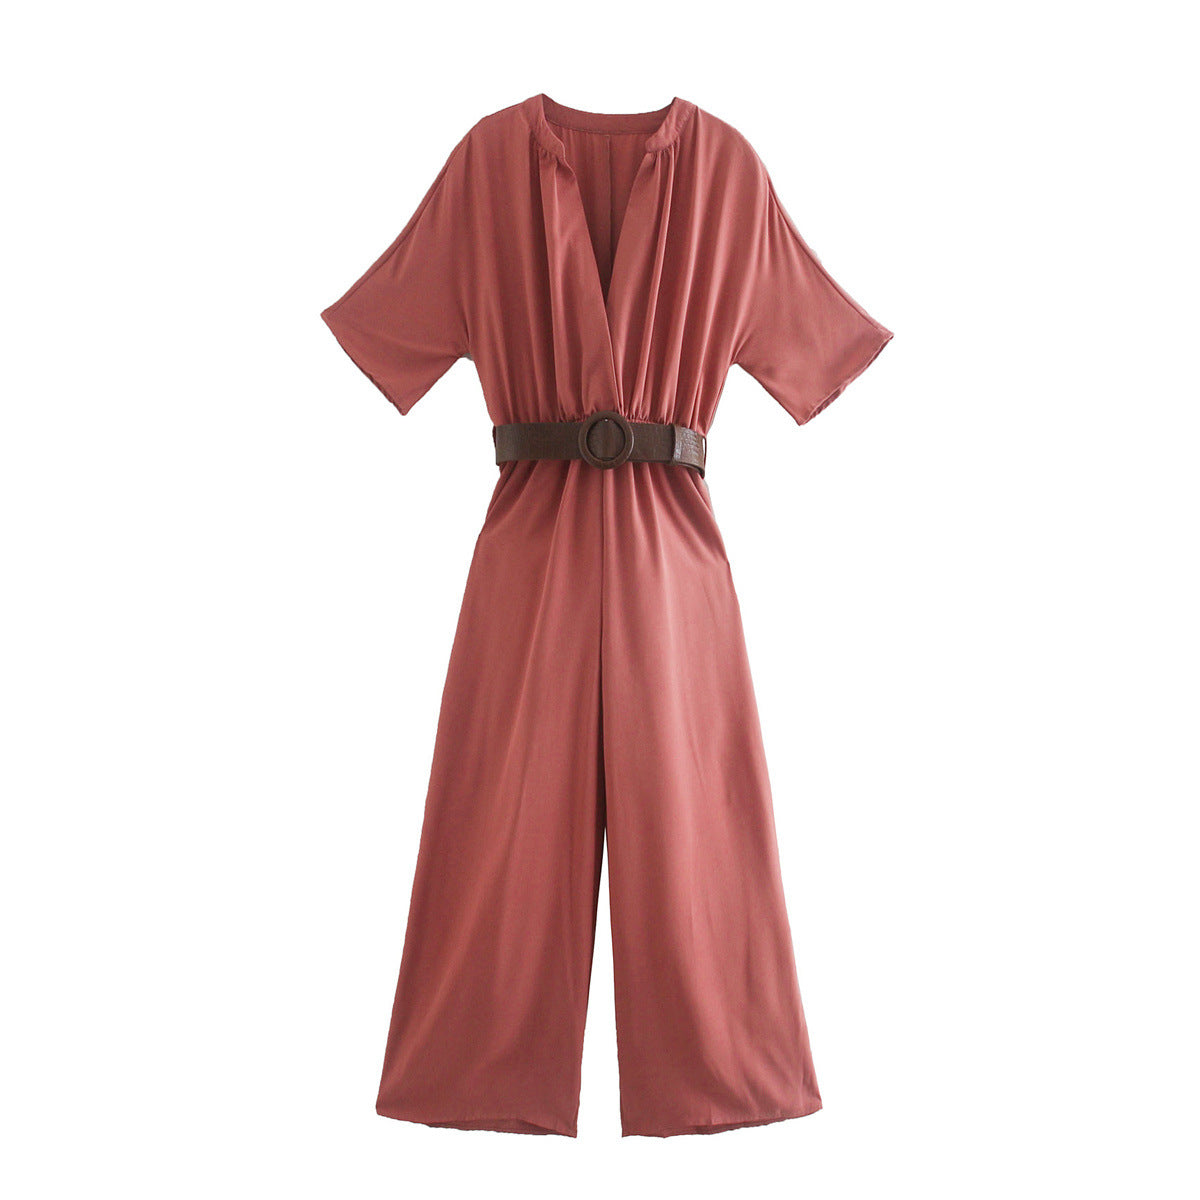 Stand-up collar belt accessory jumpsuit